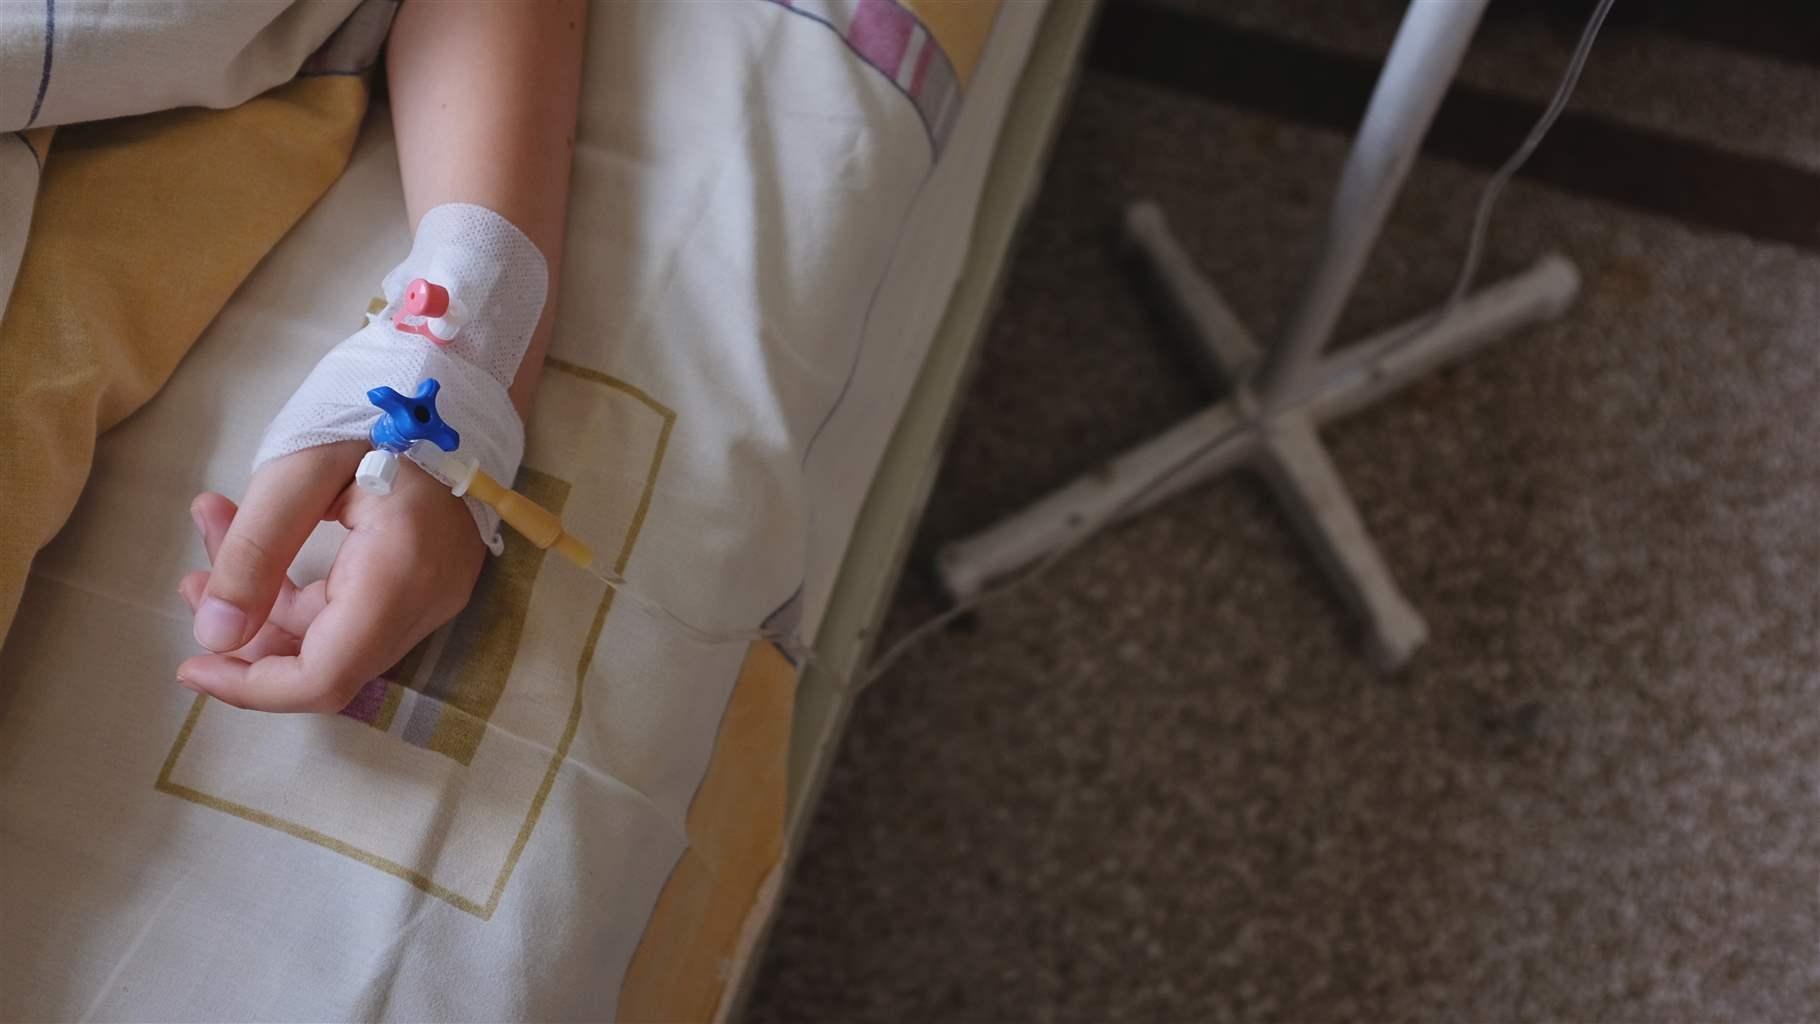 Child's hand in hospital bed, with IV drip attached